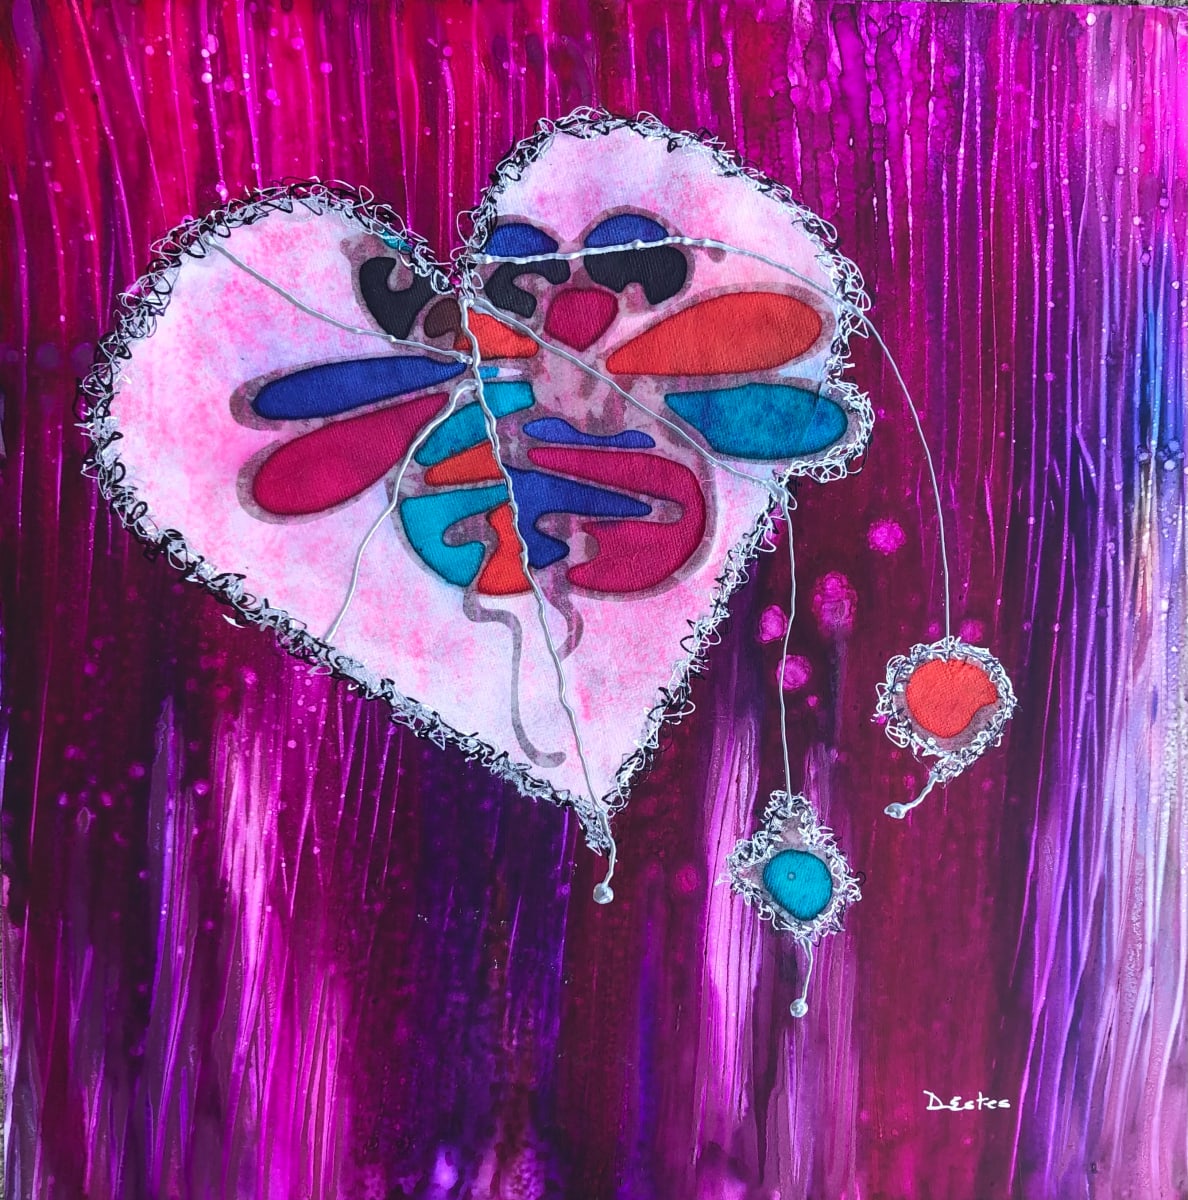 Deconstructed Heart by Debbi Estes  Image: Abstract Heart